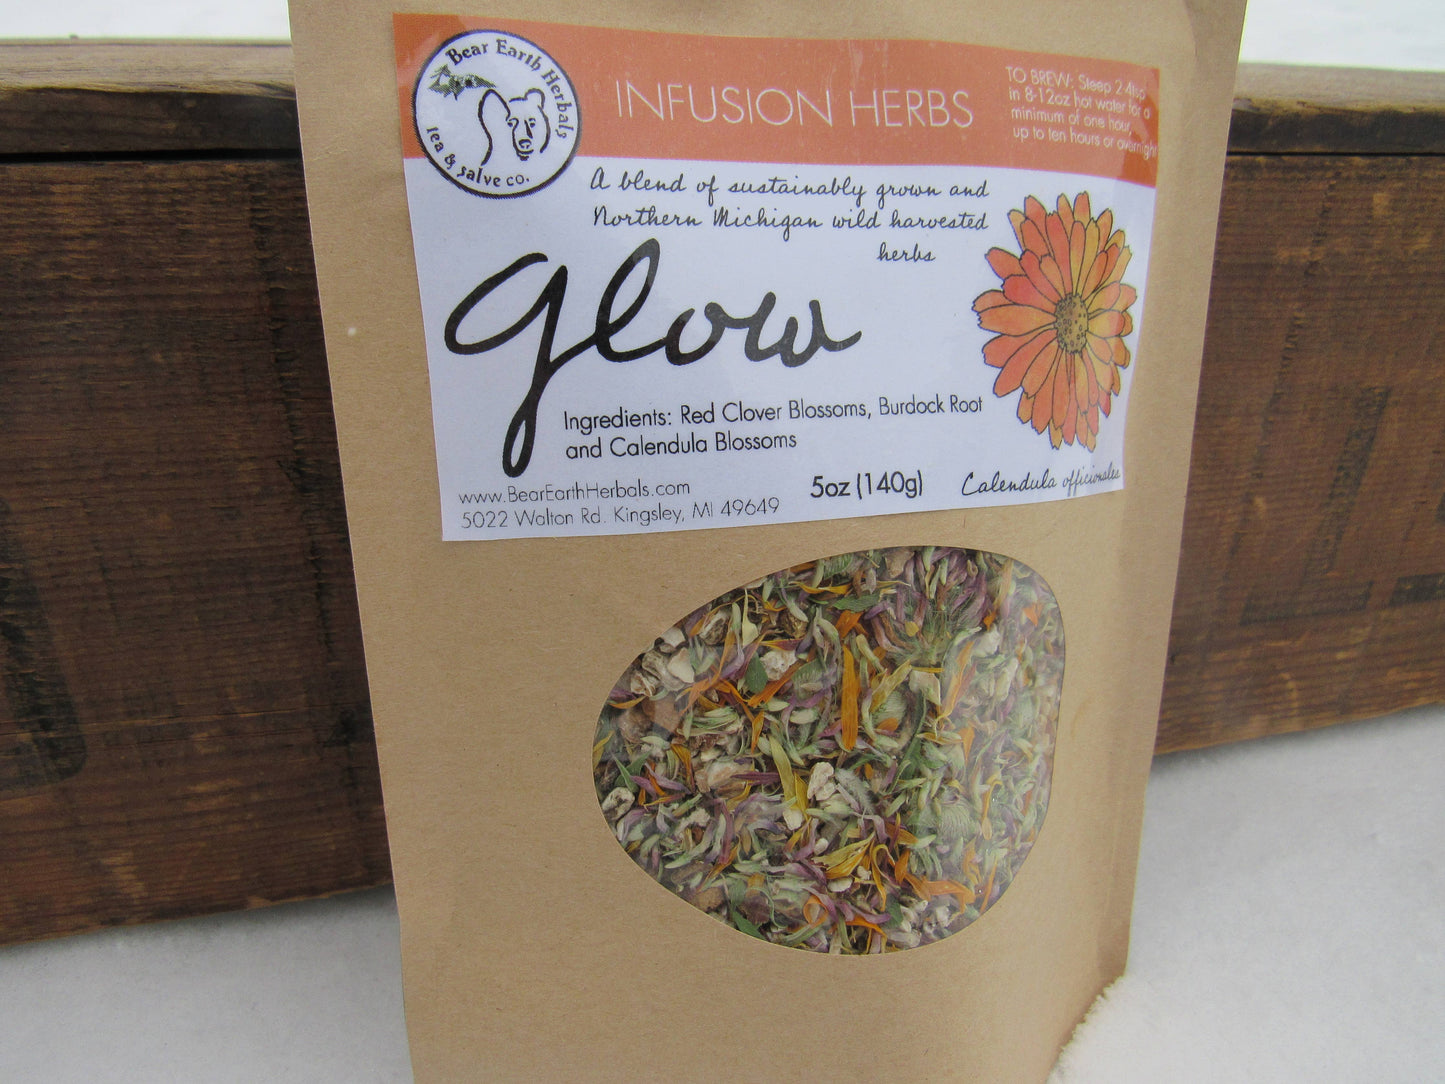 Glow - Infusion Blend